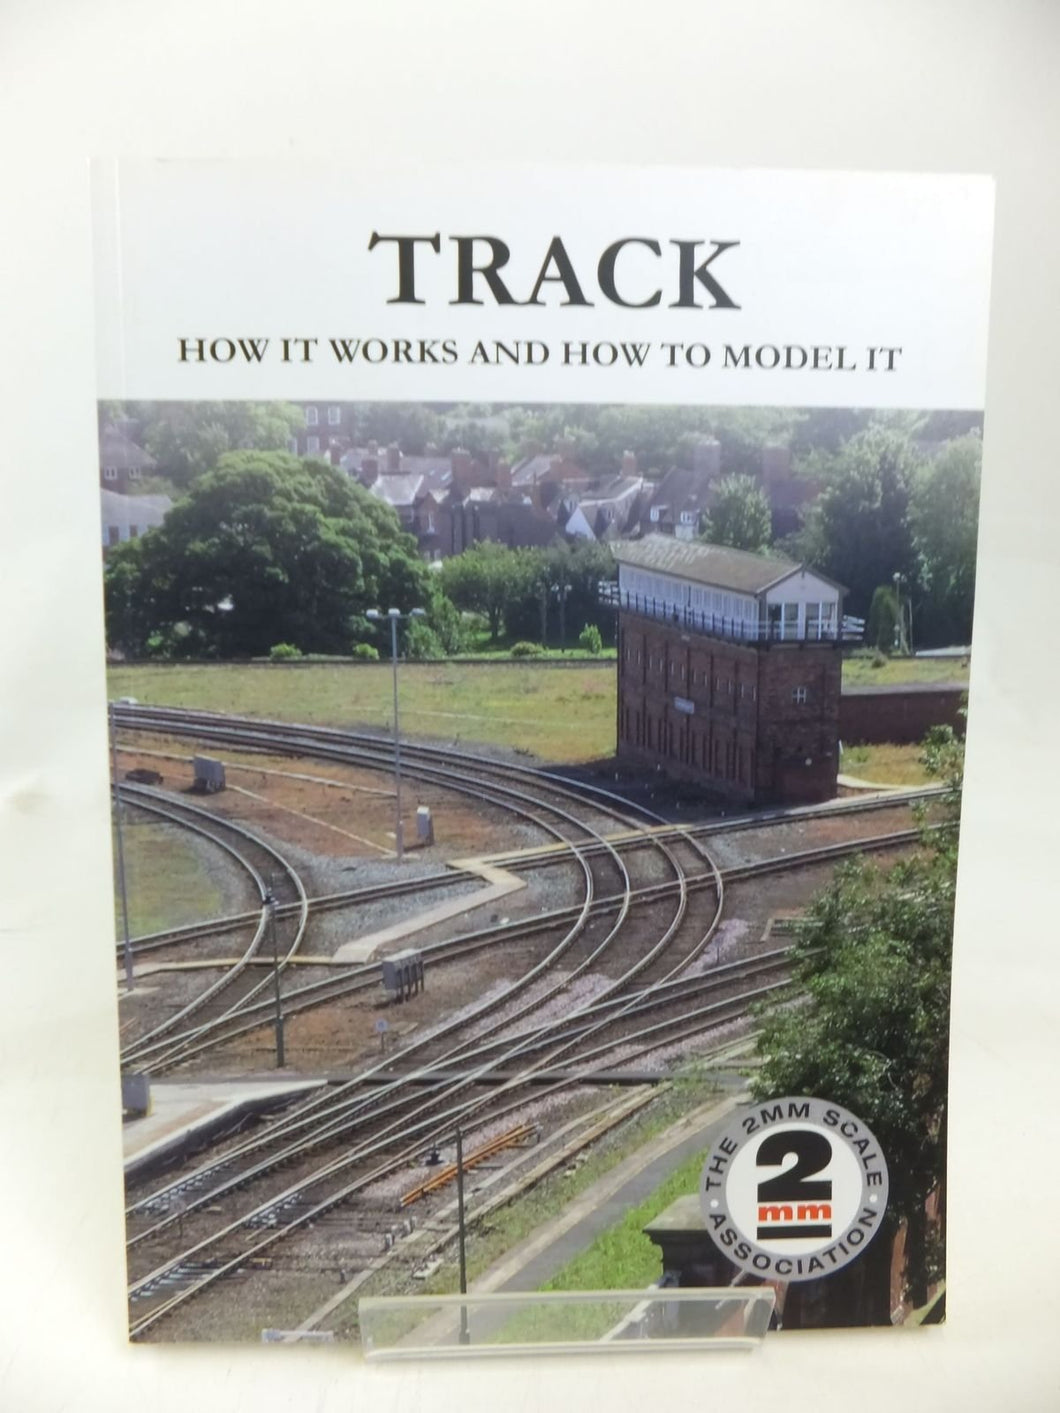 TRACK HOW IT WORKS AND HOW TO MODEL IT